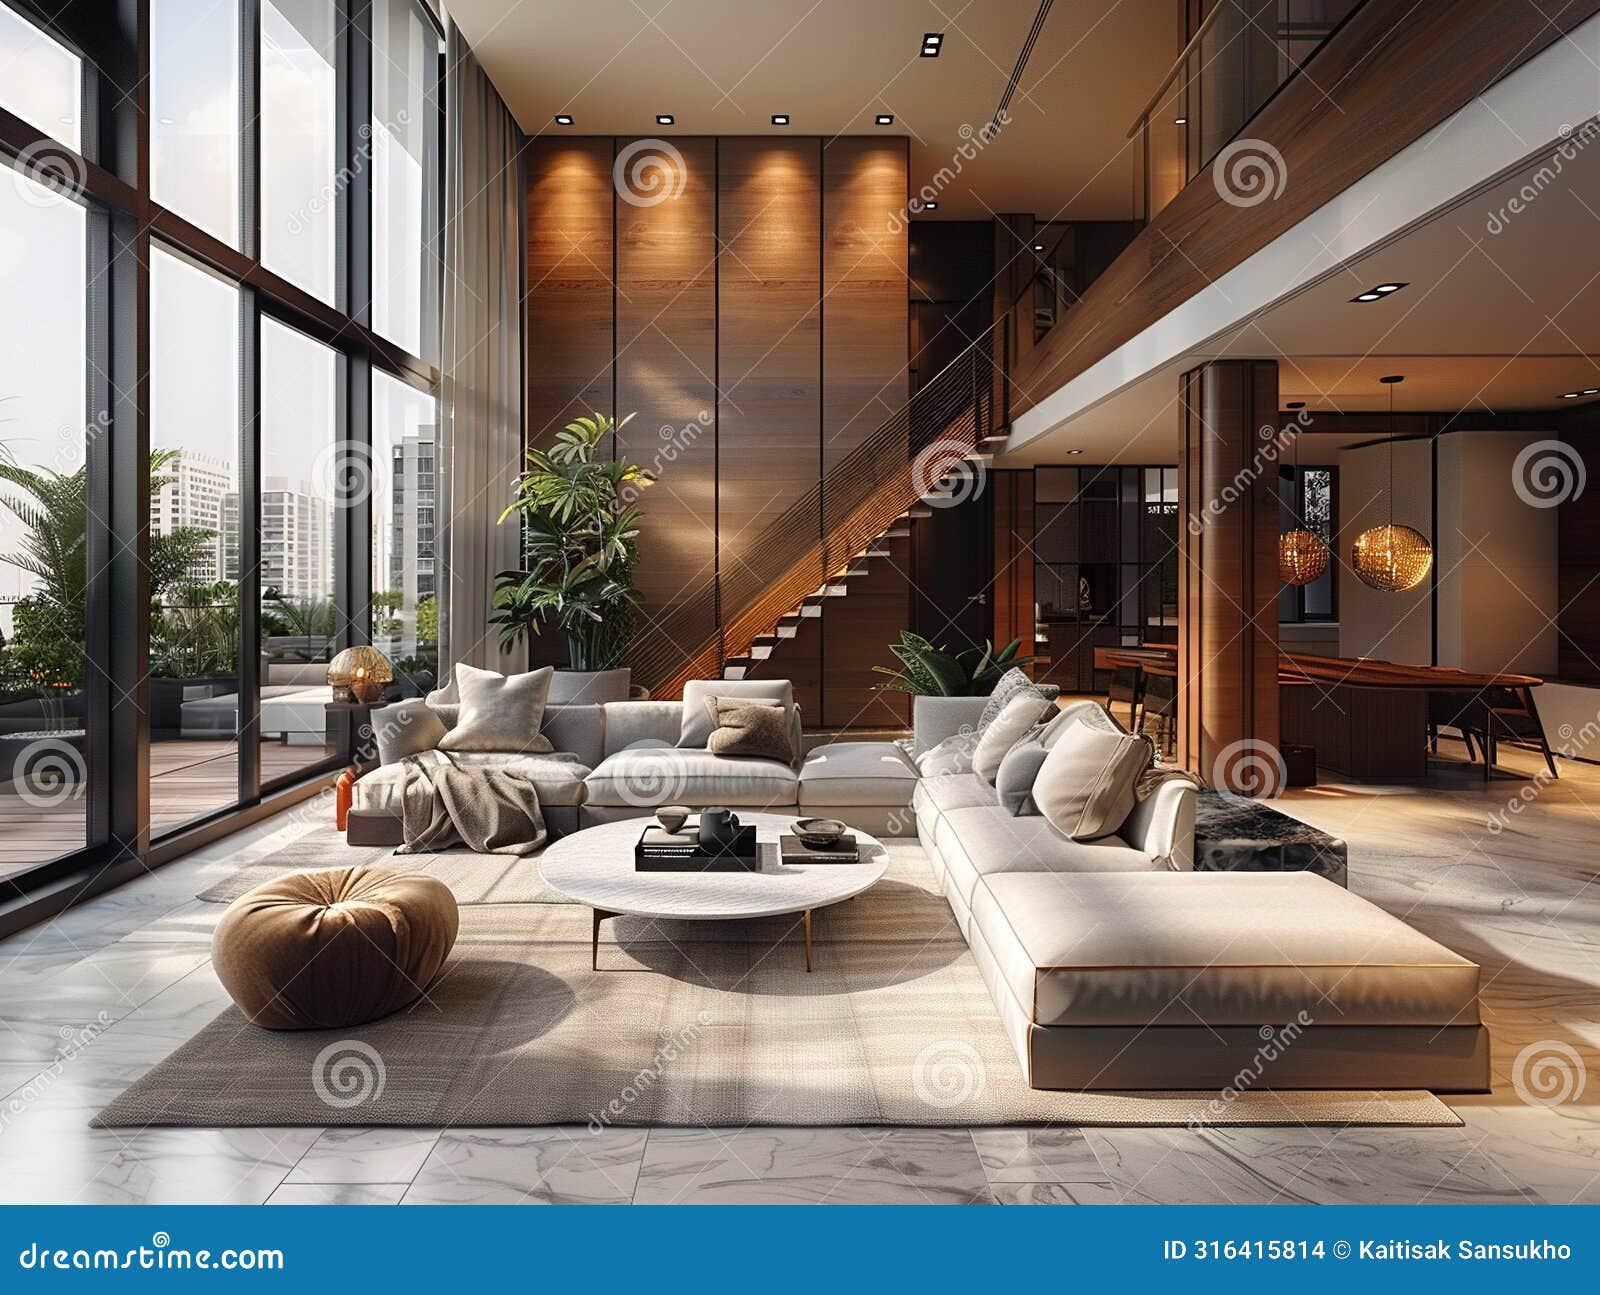 modern luxury living room interior with large windows, high ceilings, and open floor plan